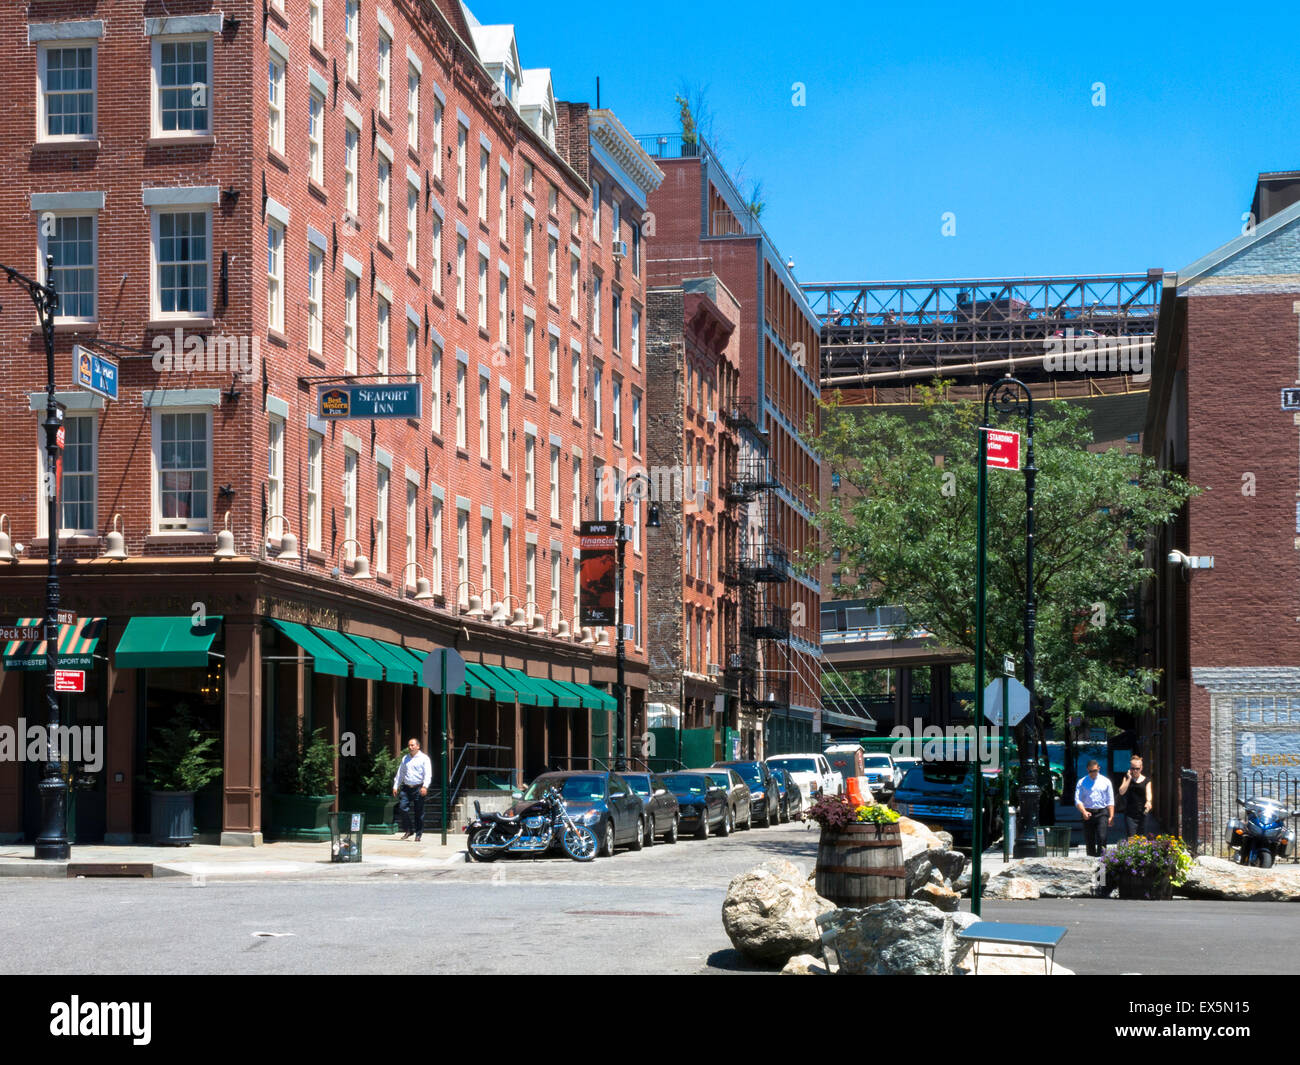 South Street Seaport Historic District, NYC Stock Photo - Alamy